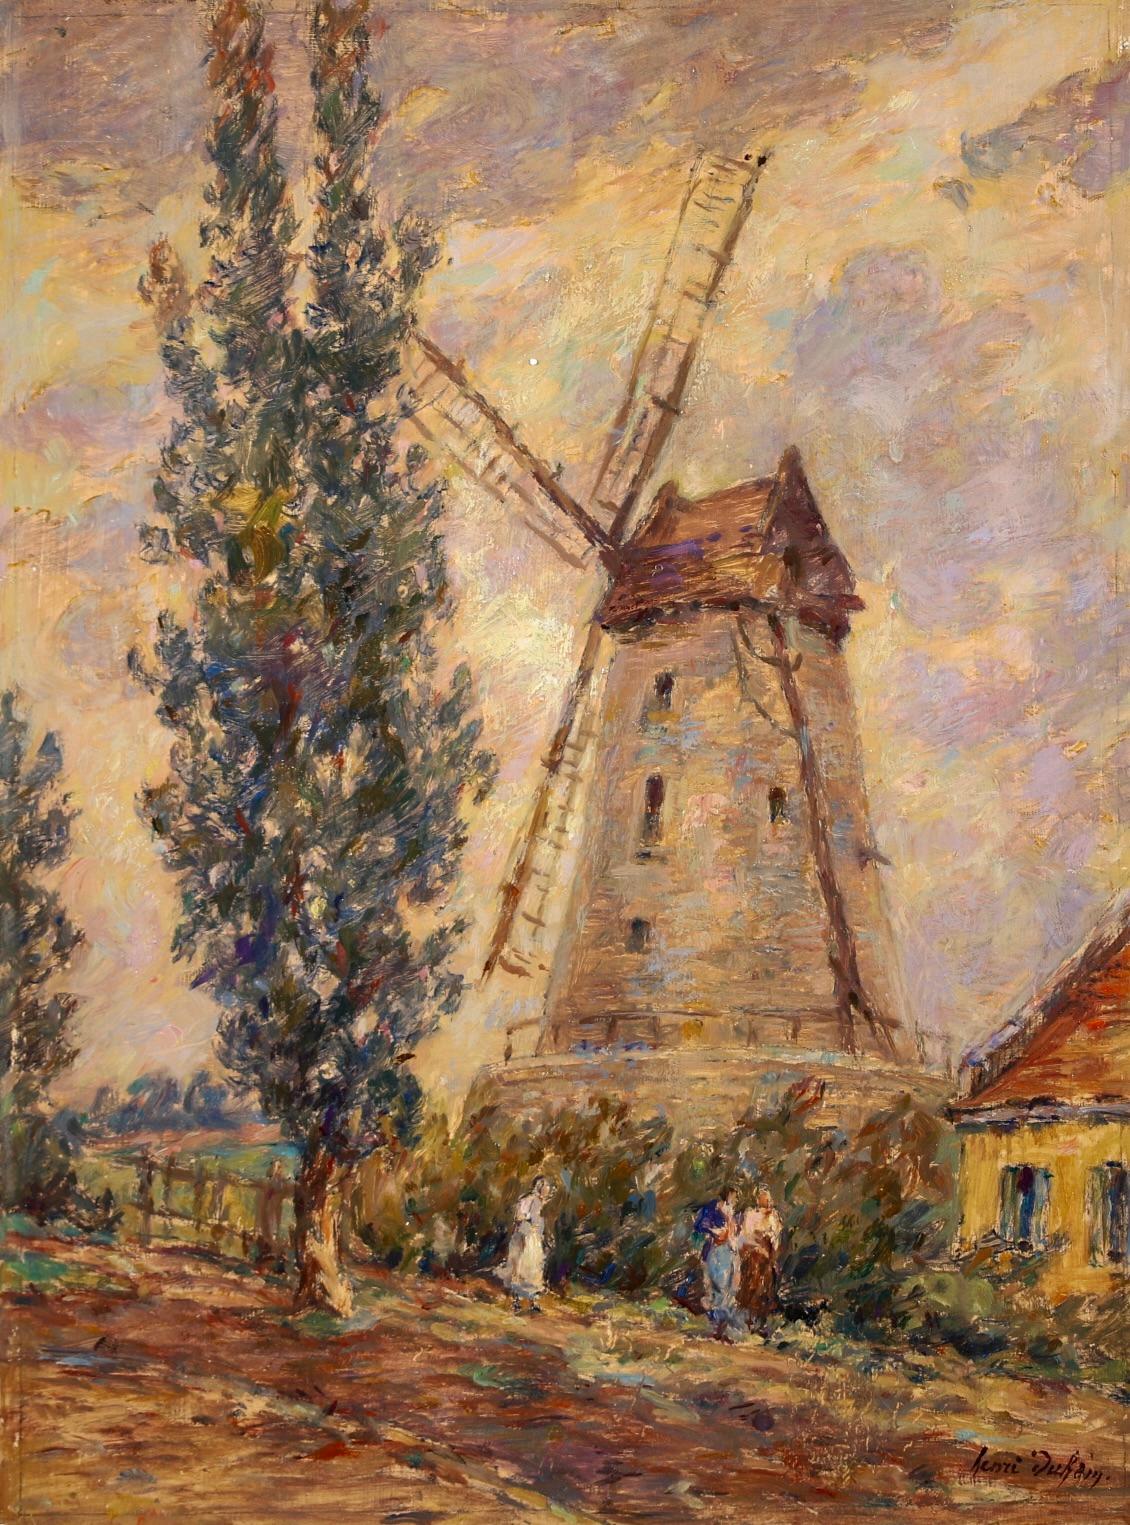 Oil on board circa 1910 by French Impressionist painter Henri Duhem. The painting depicts three women and a dog walking along a path beside a windmill. There is a tree to their right and clouds - which are particularly beautifully painted and